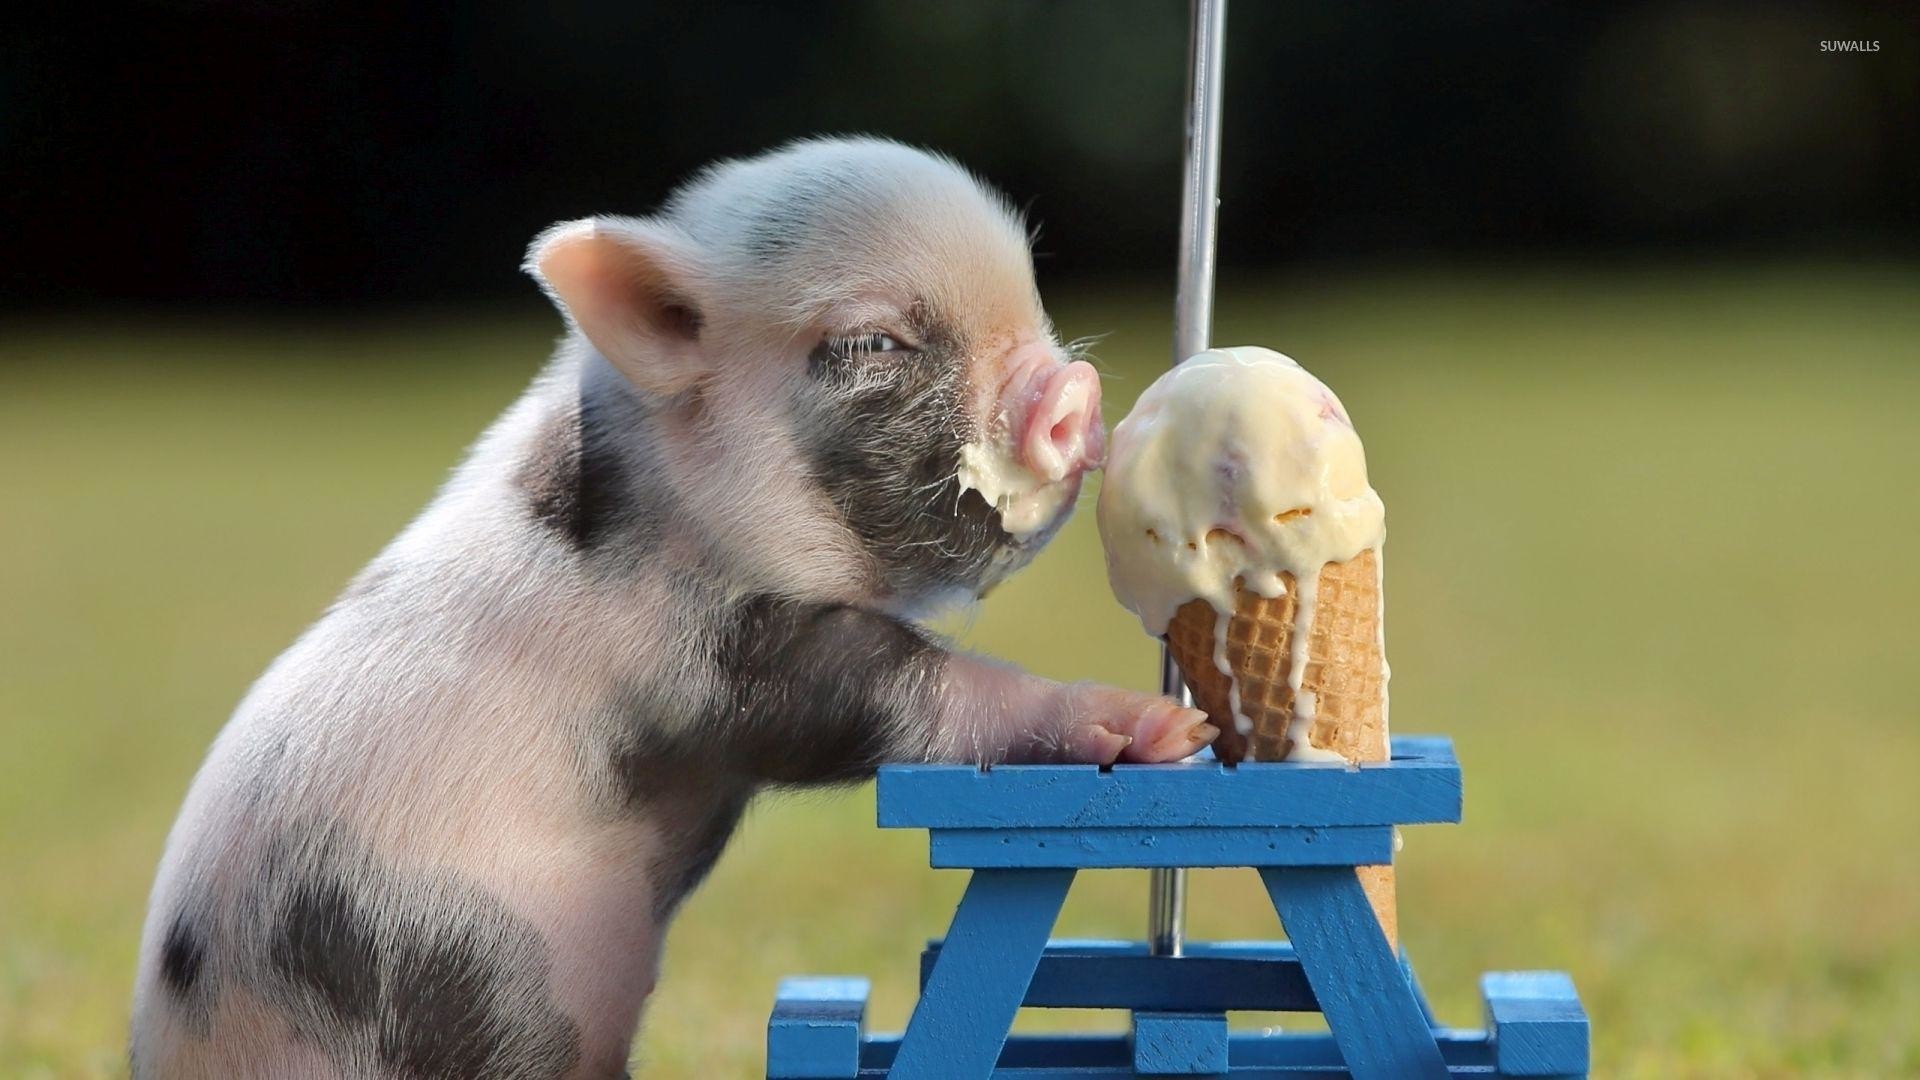 1920x1080 Piglet eating ice cream wallpaper - Funny wallpapers - #42372